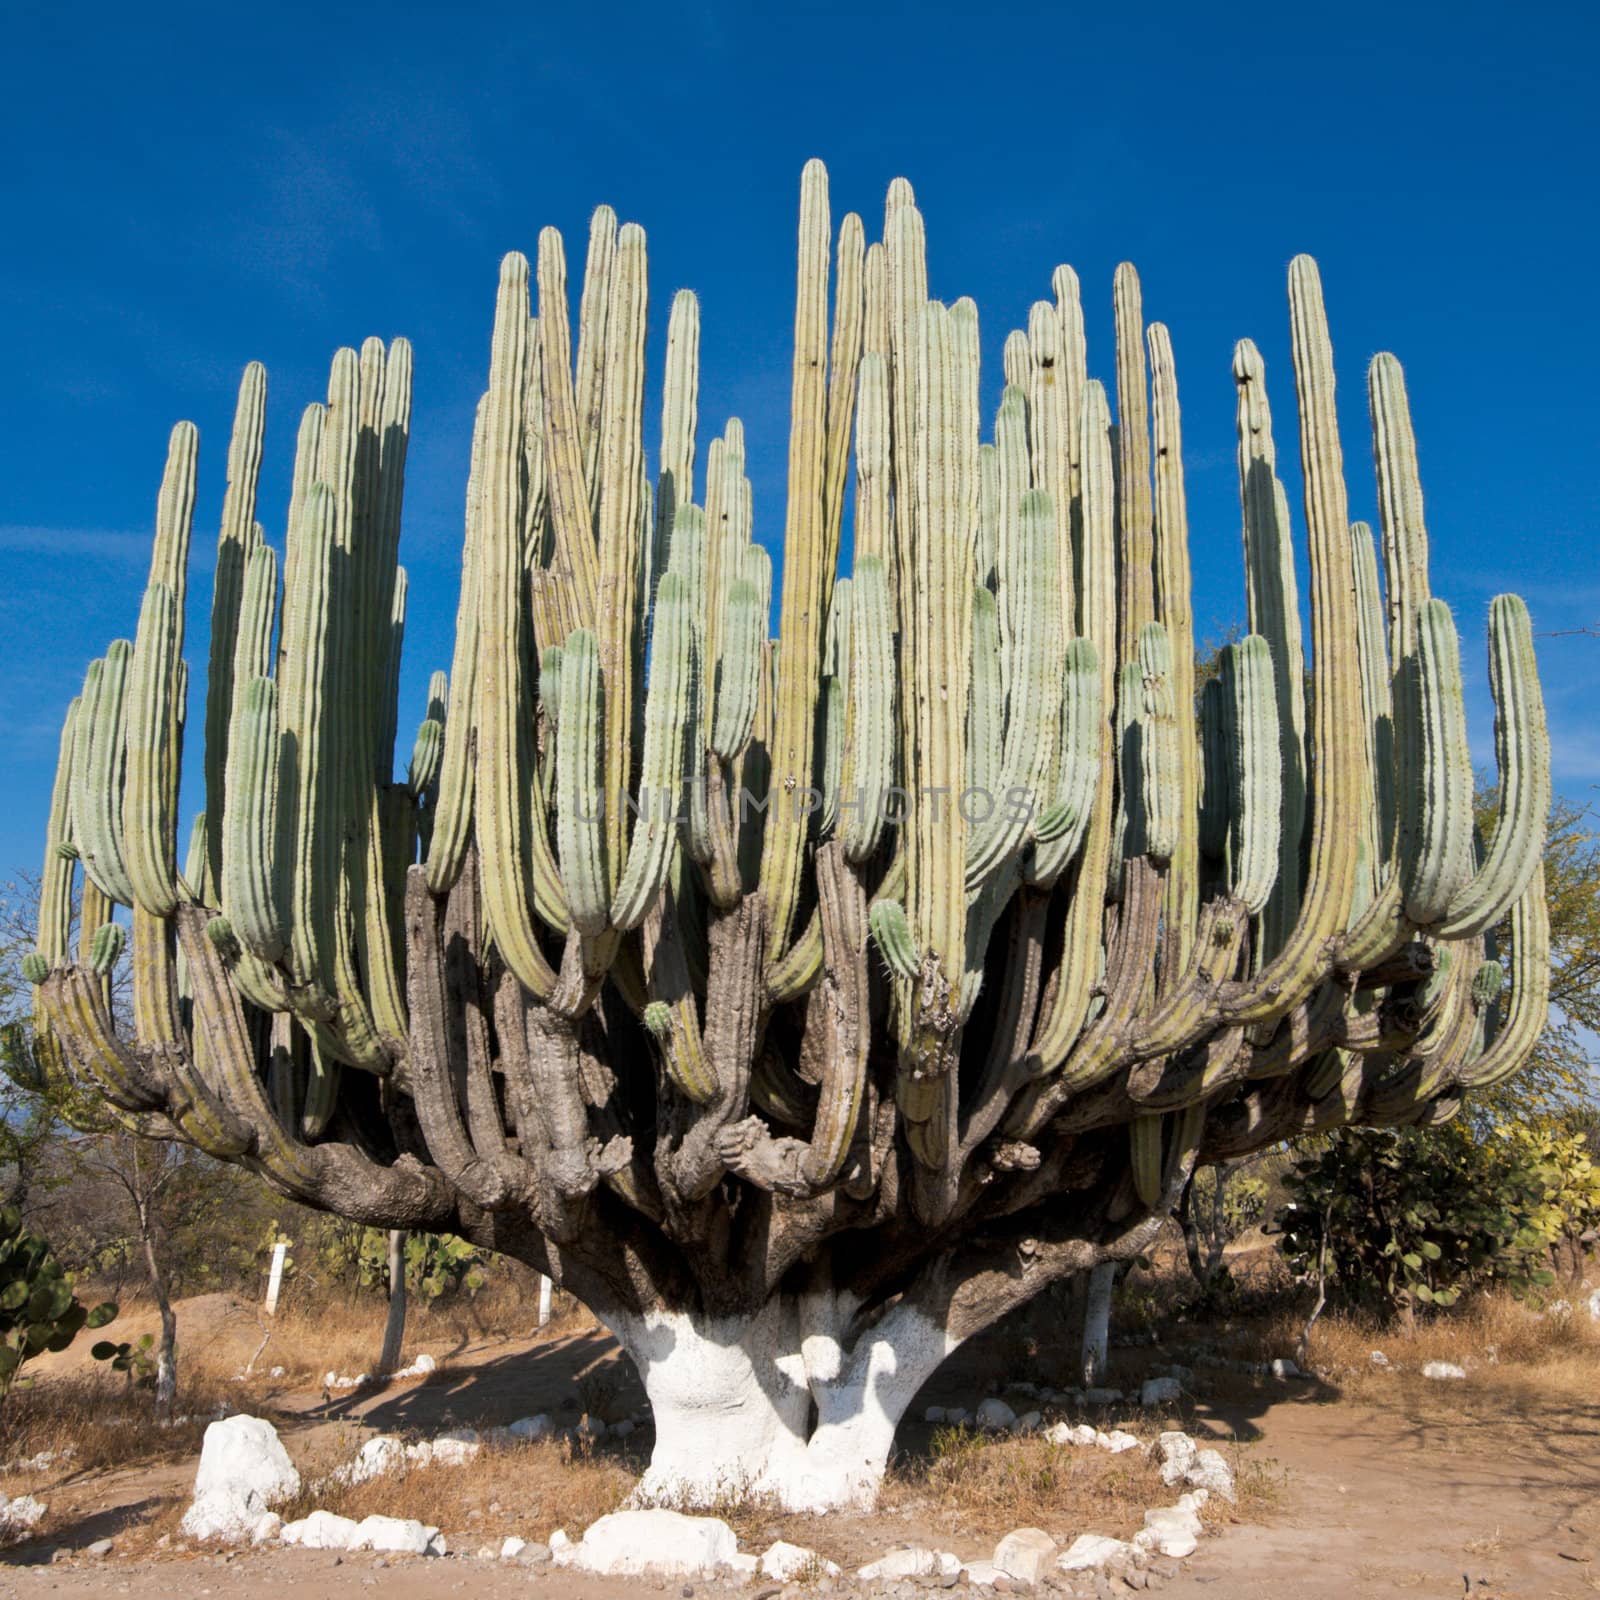 Giant cactus in Mexico by dimol